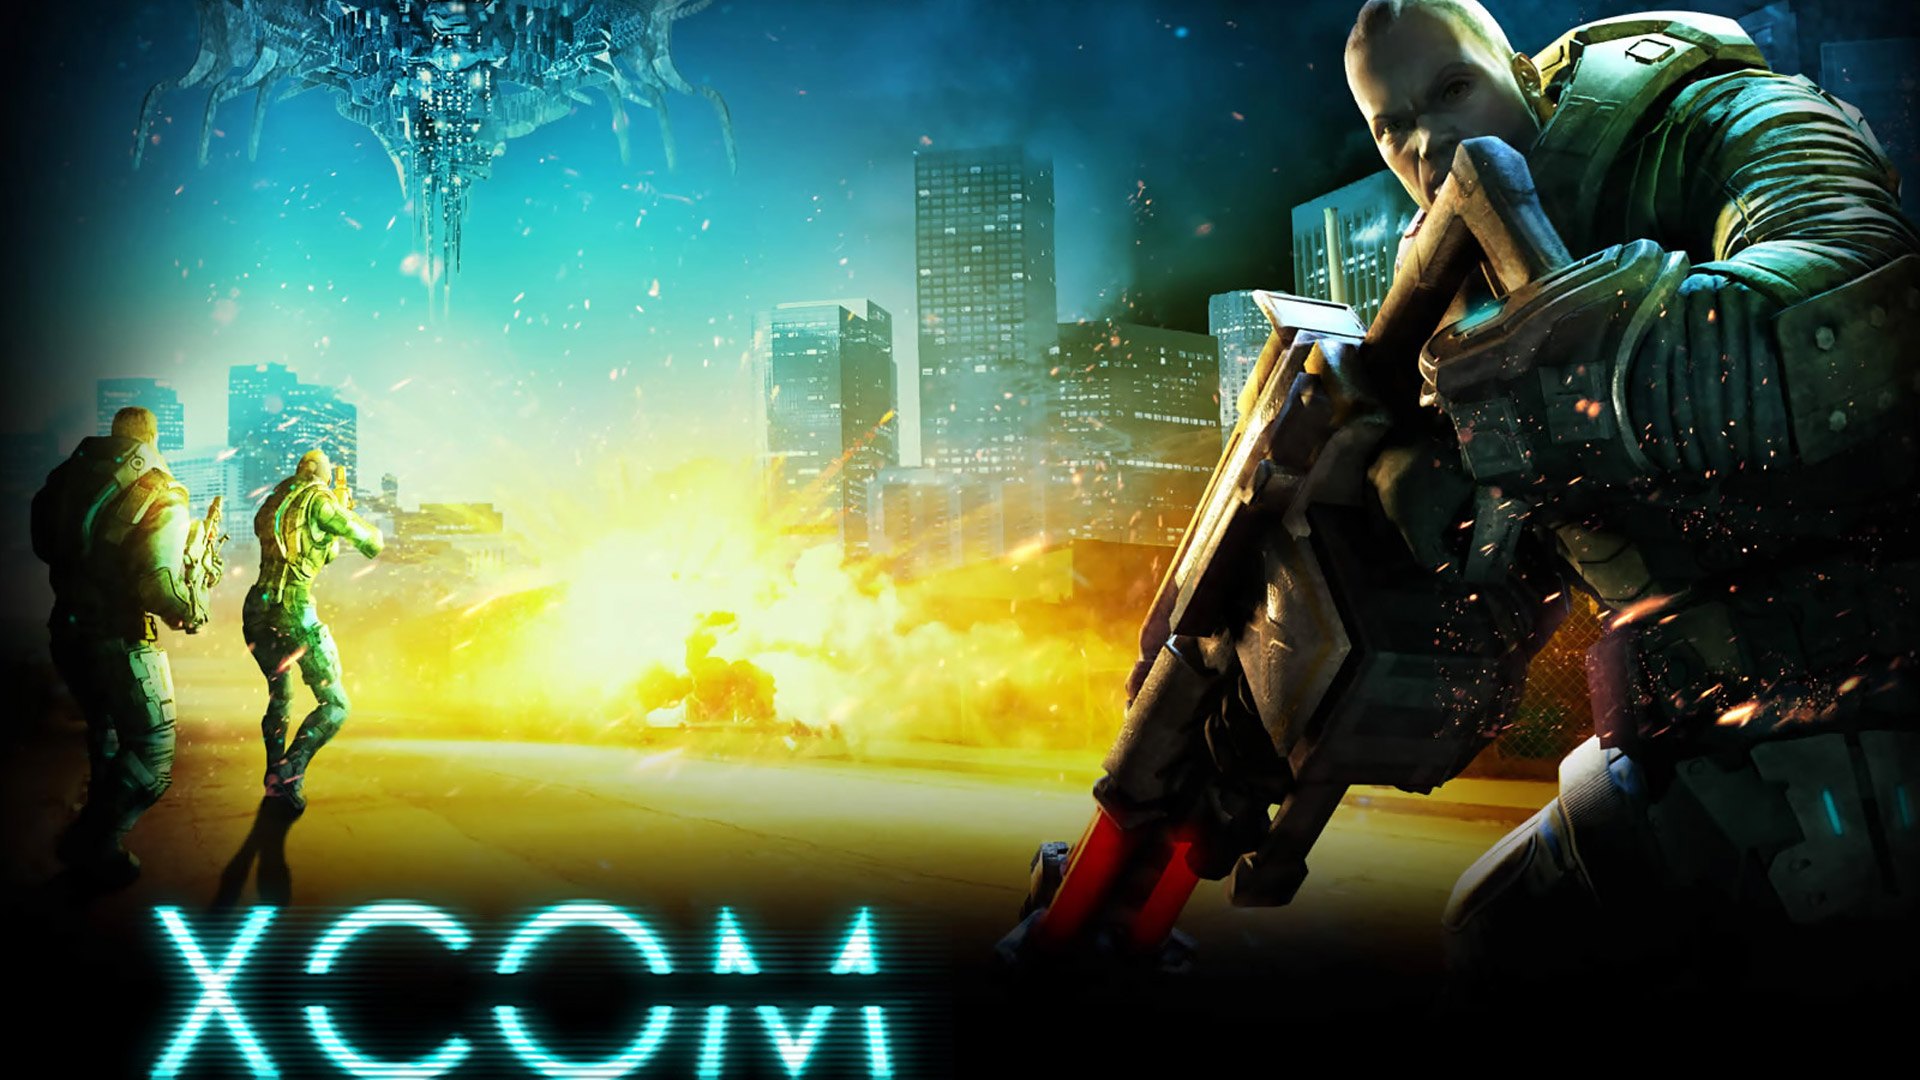 Xcom enemy unknown sci fi wallpapers hd desktop and mobile backgrounds